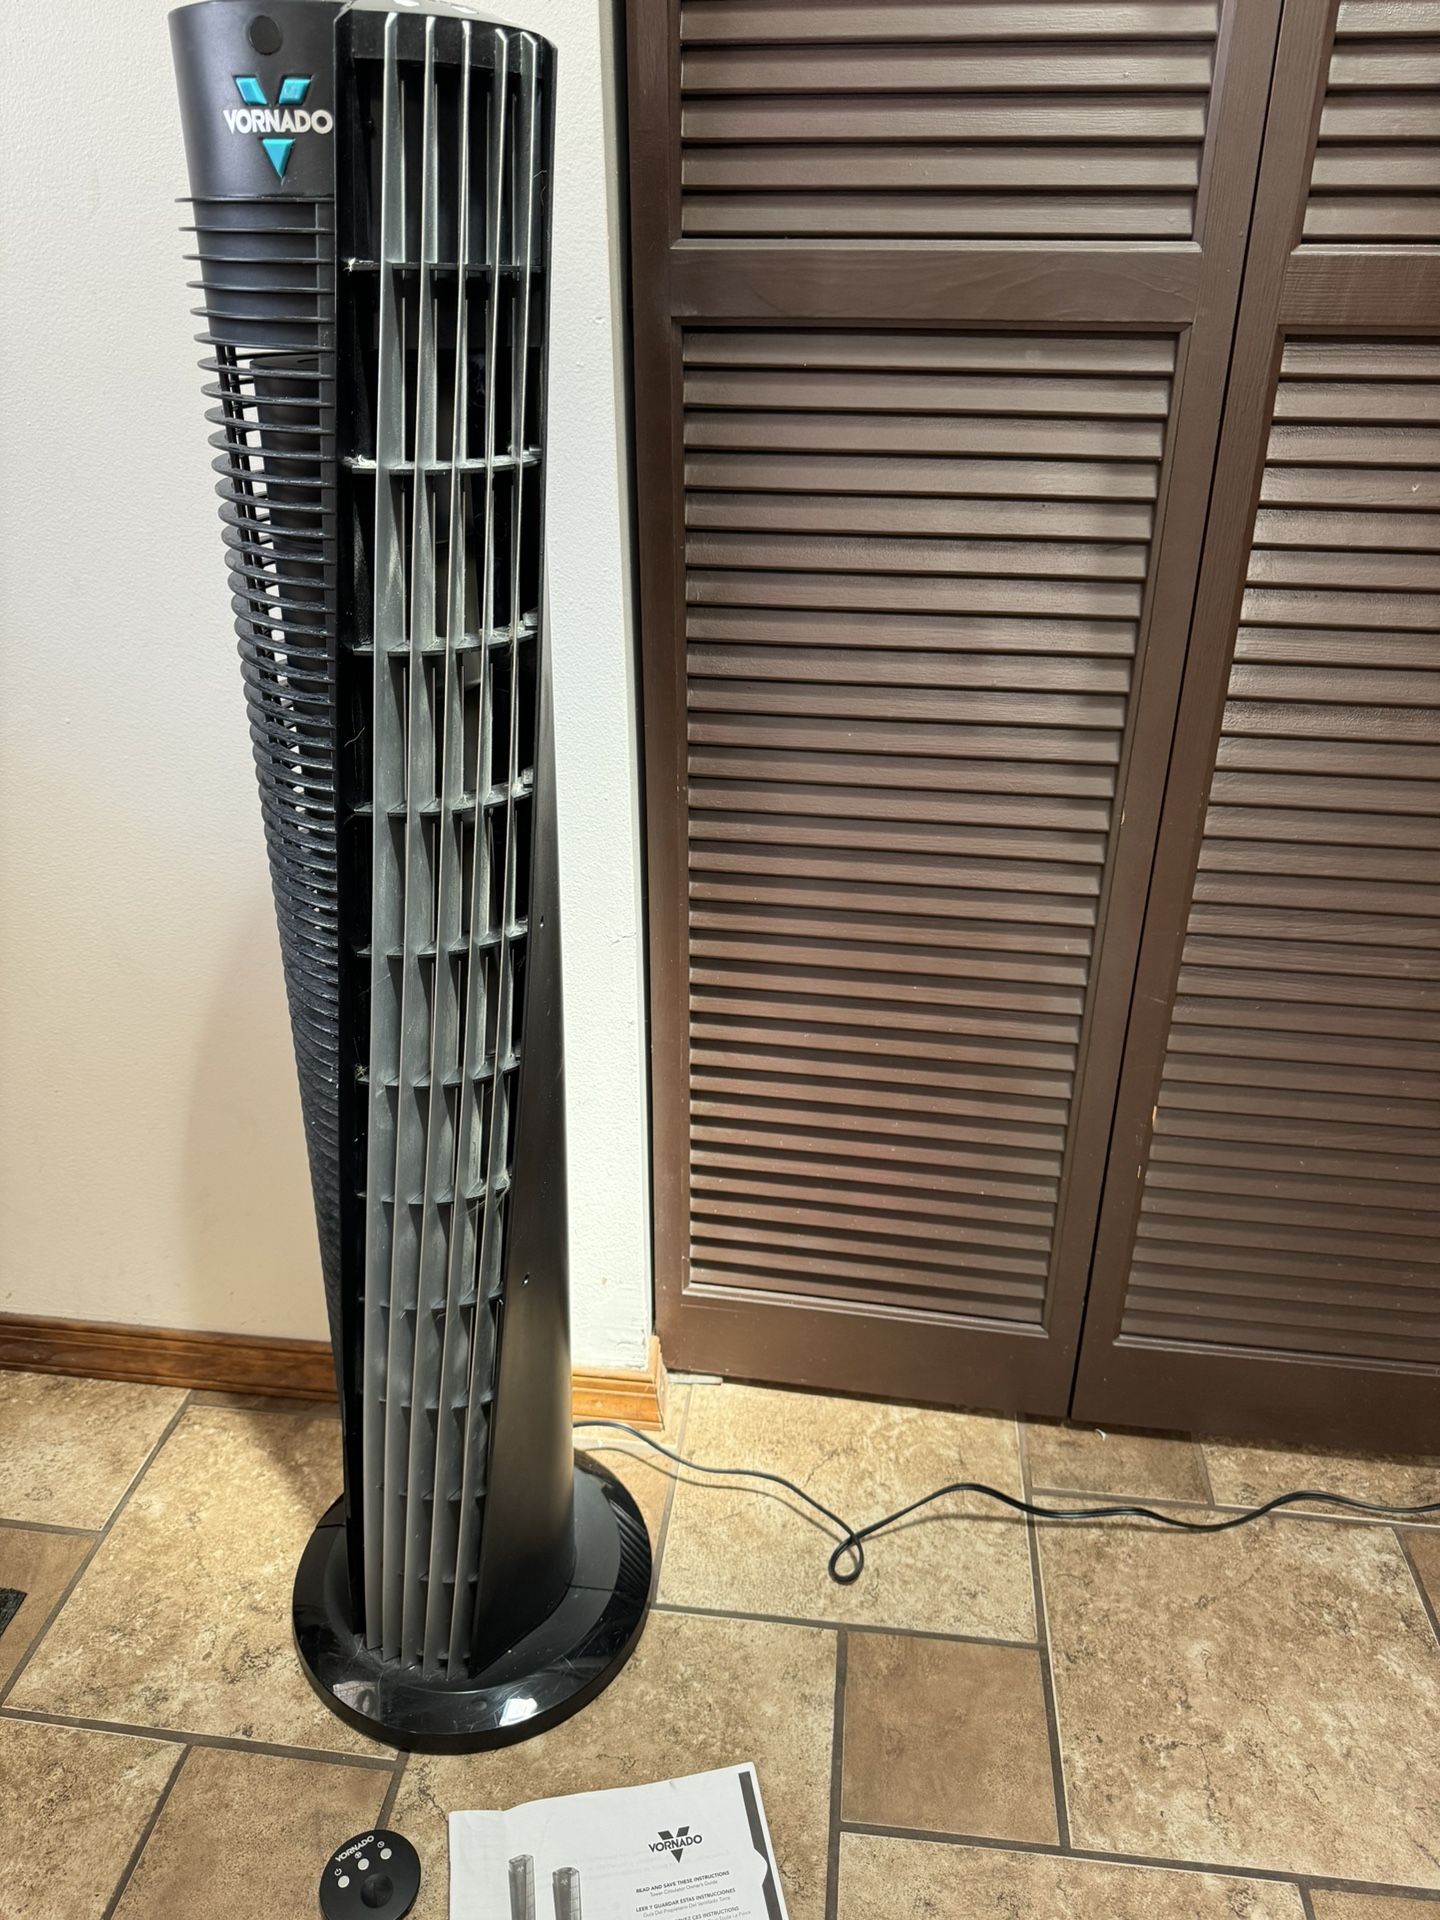 Vornado 41” Tower Fan With Remote. Remote Missing Back Cover But Works. You Pickup